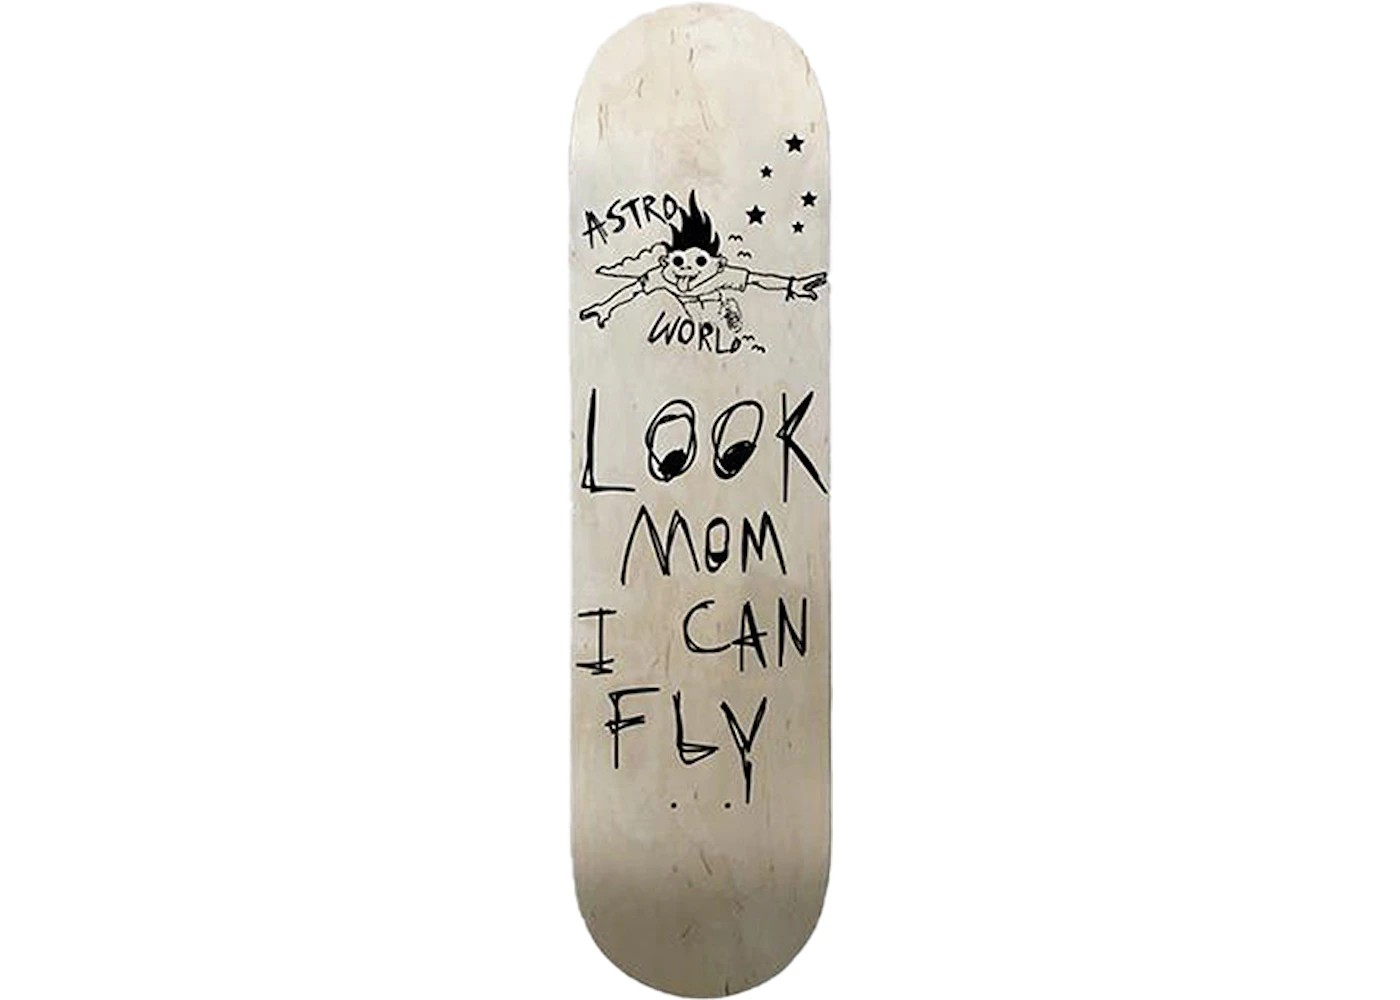 Travis Scott Astroworld Look Mom I Can Fly Deck